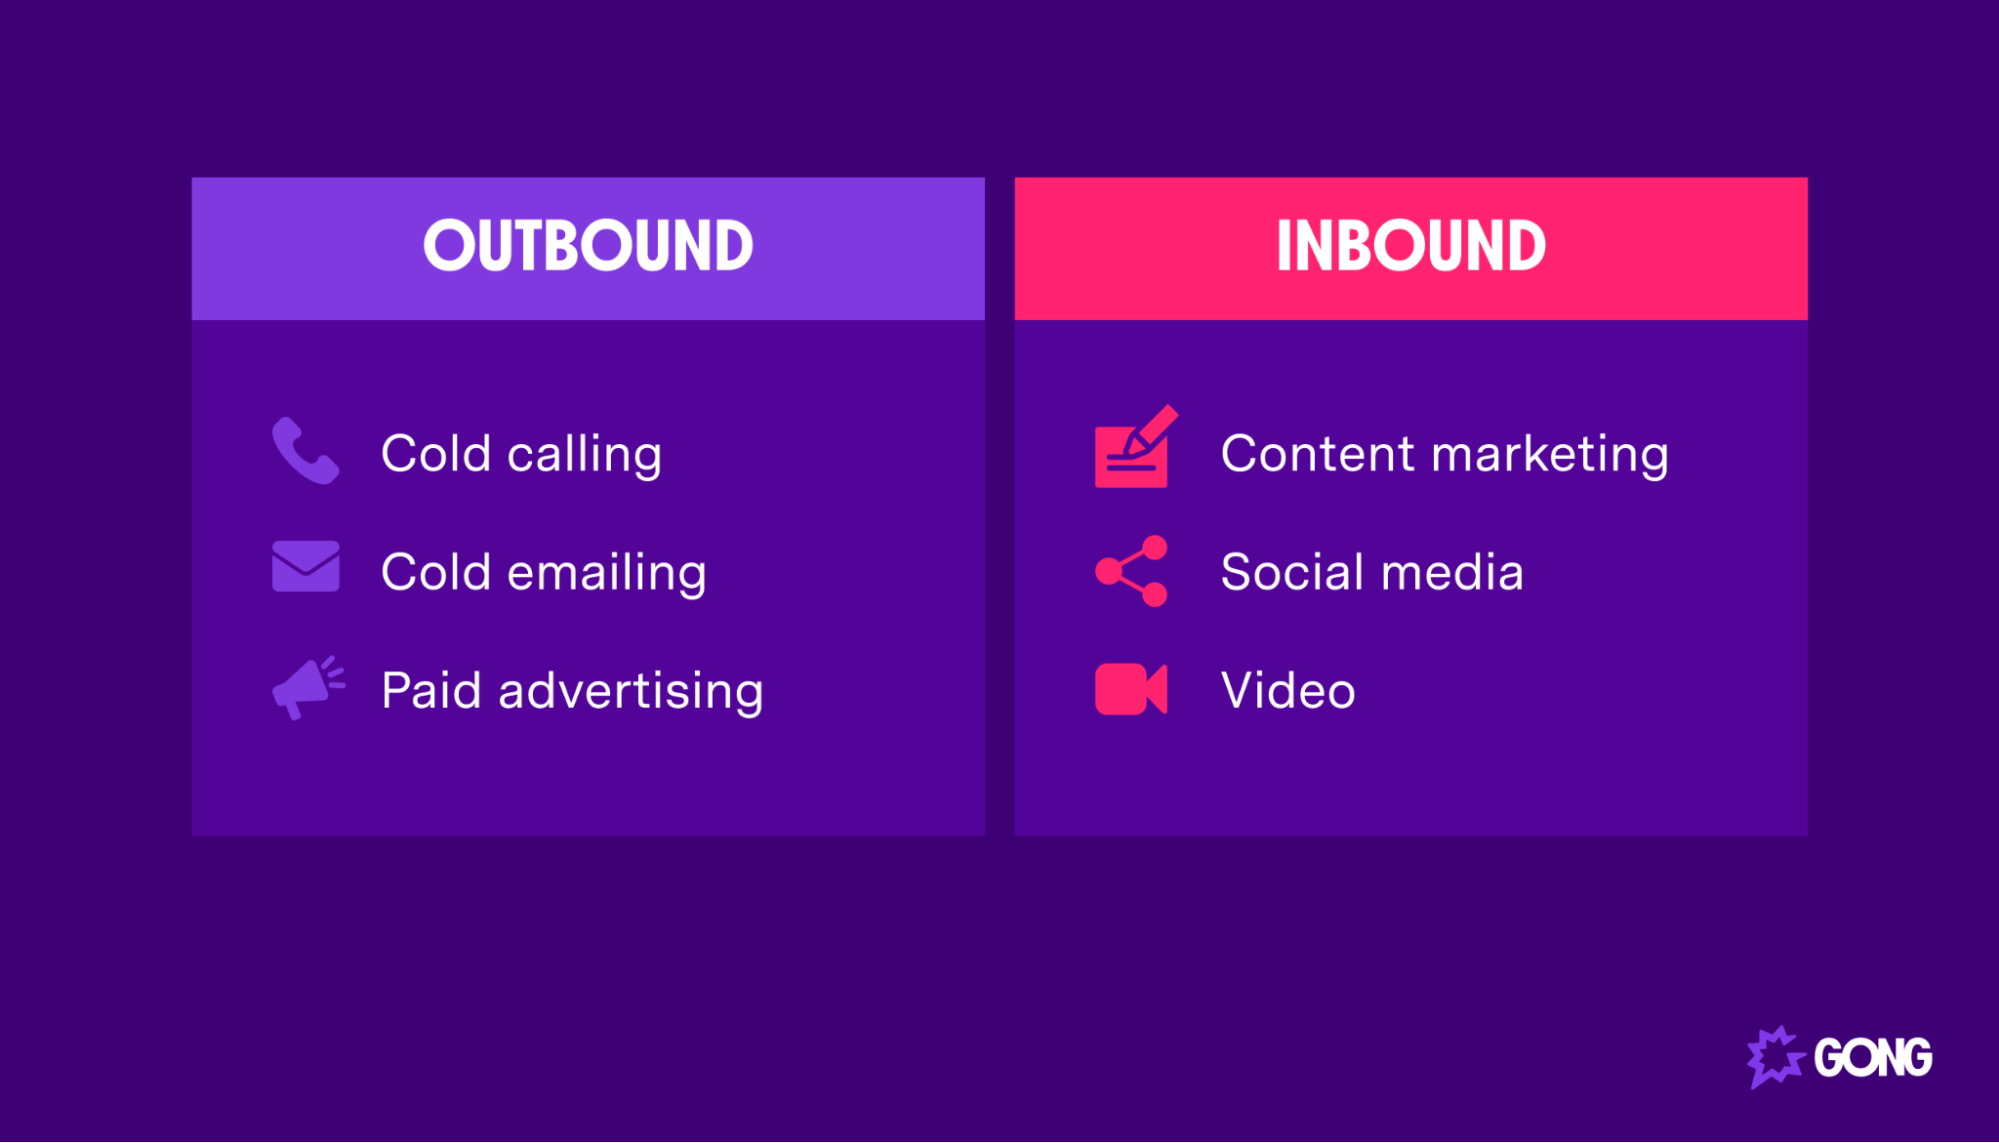 The differences between outbound and inbound marketing